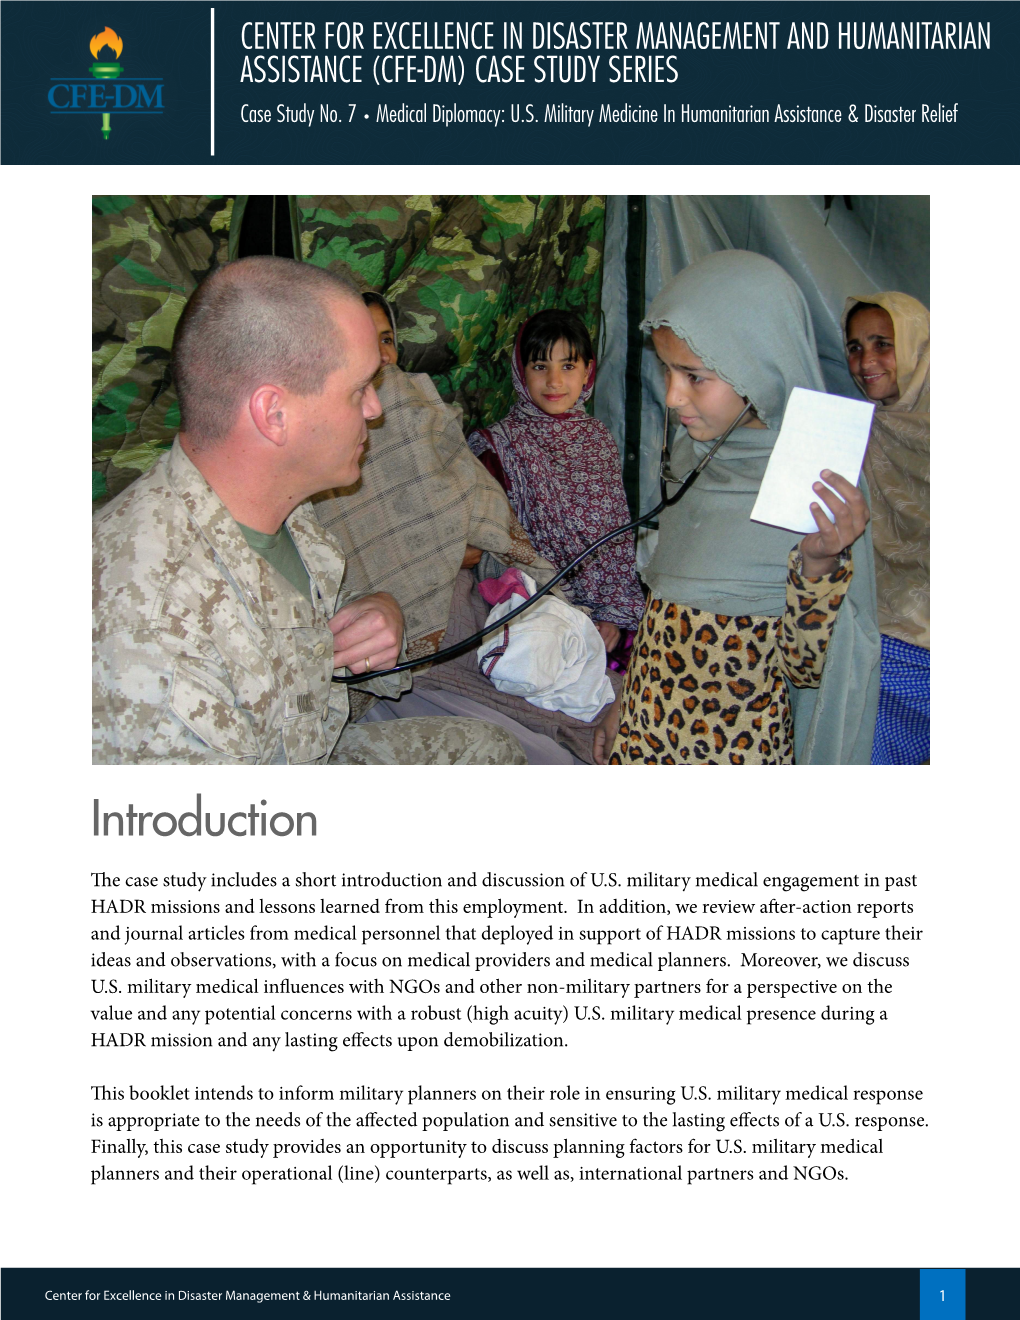 U.S. Military Medicine in Humanitarian Assistance & Disaster Relief